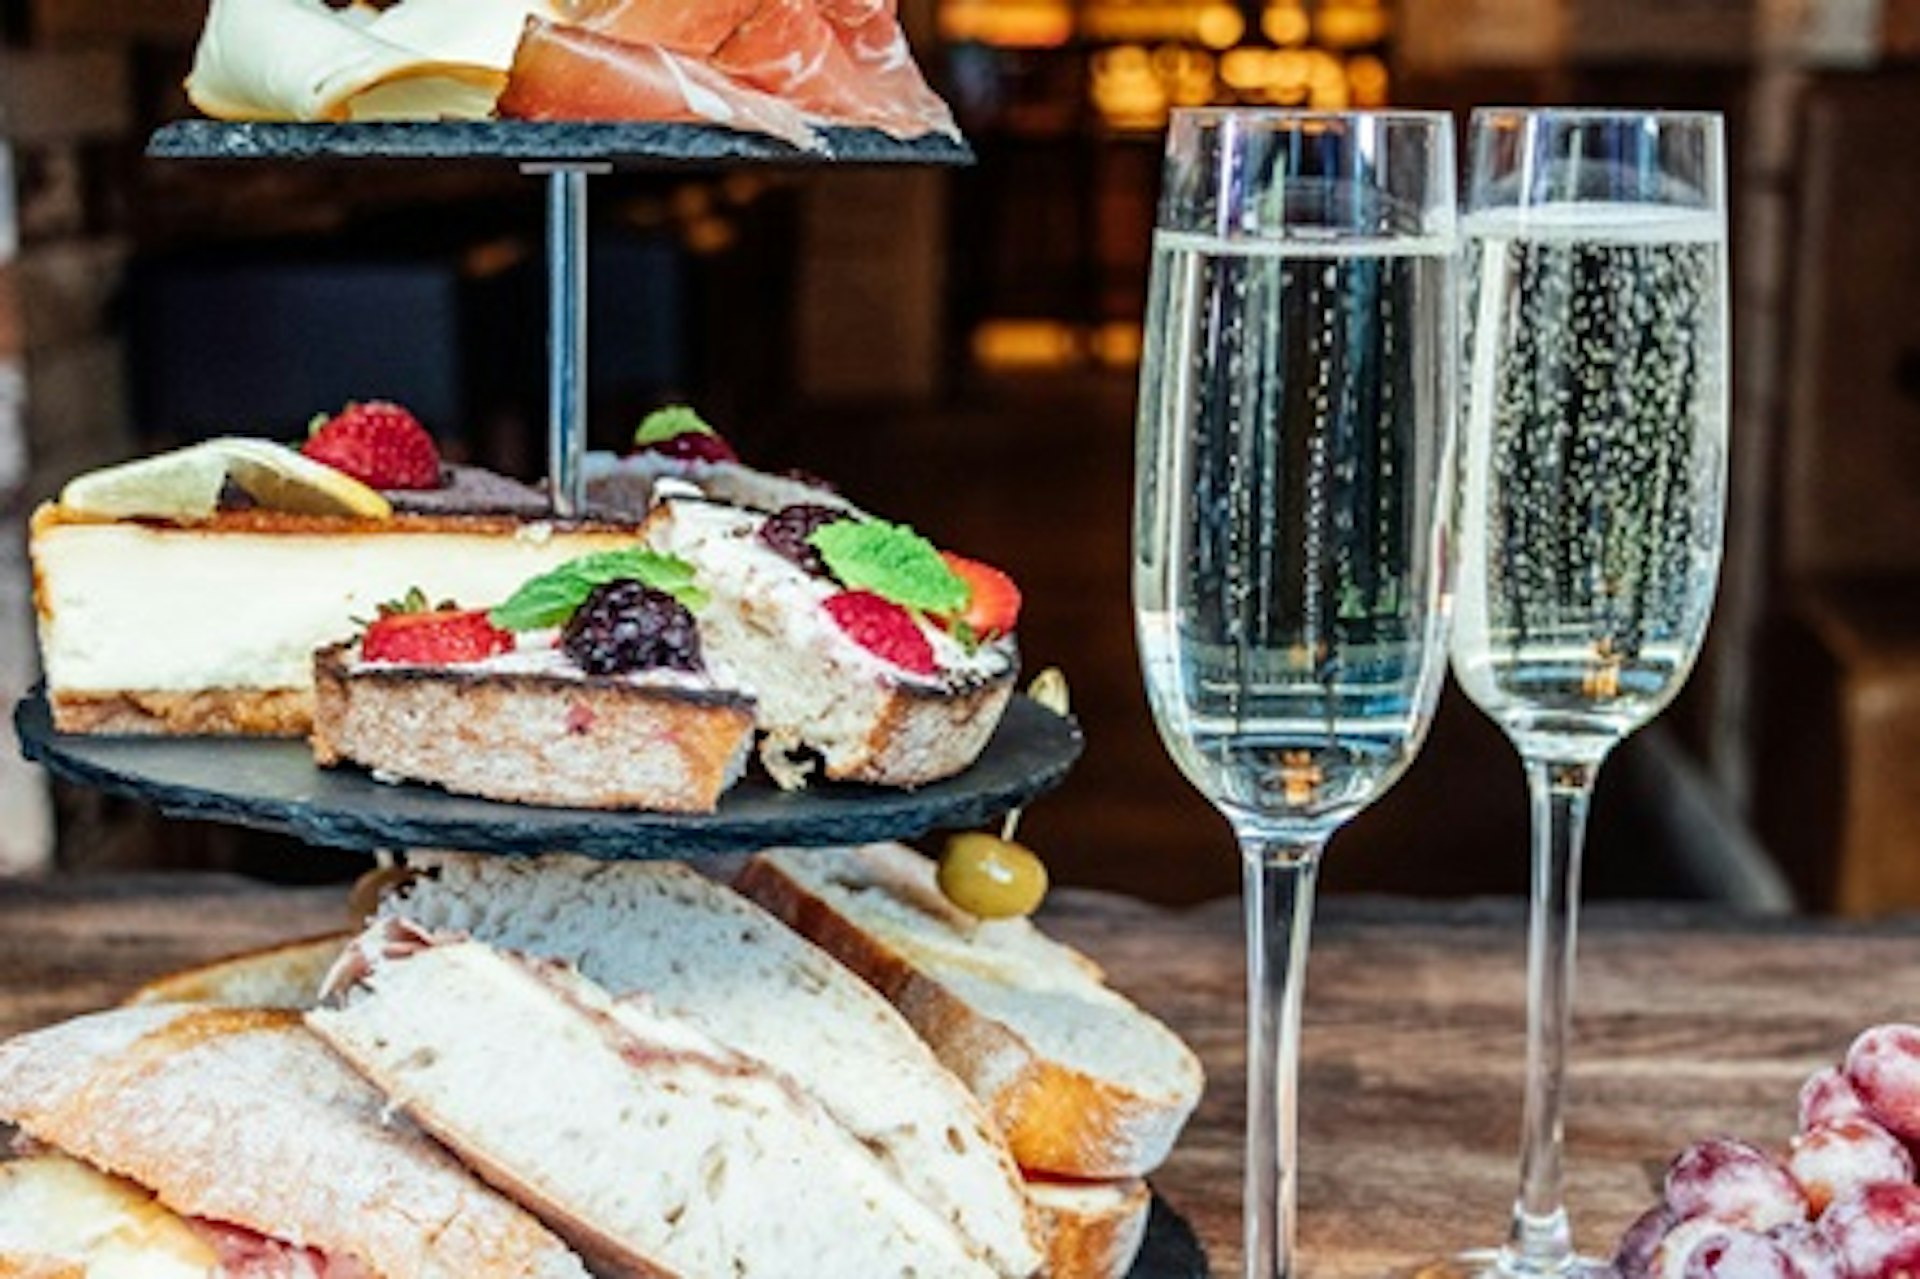 Italian Afternoon Tea with Prosecco for Two at Veeno